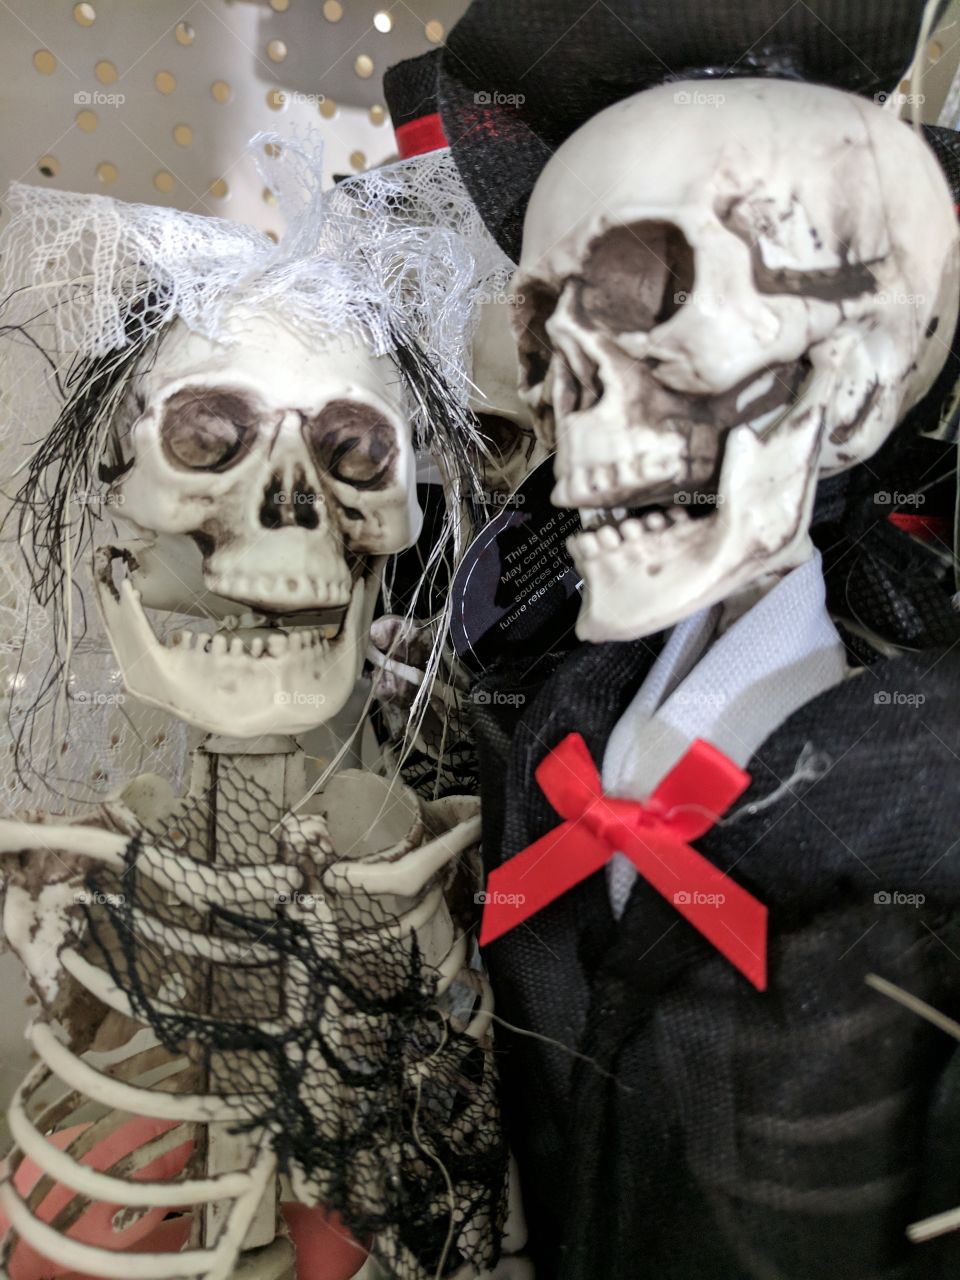 Mrs and Mr skeletons.